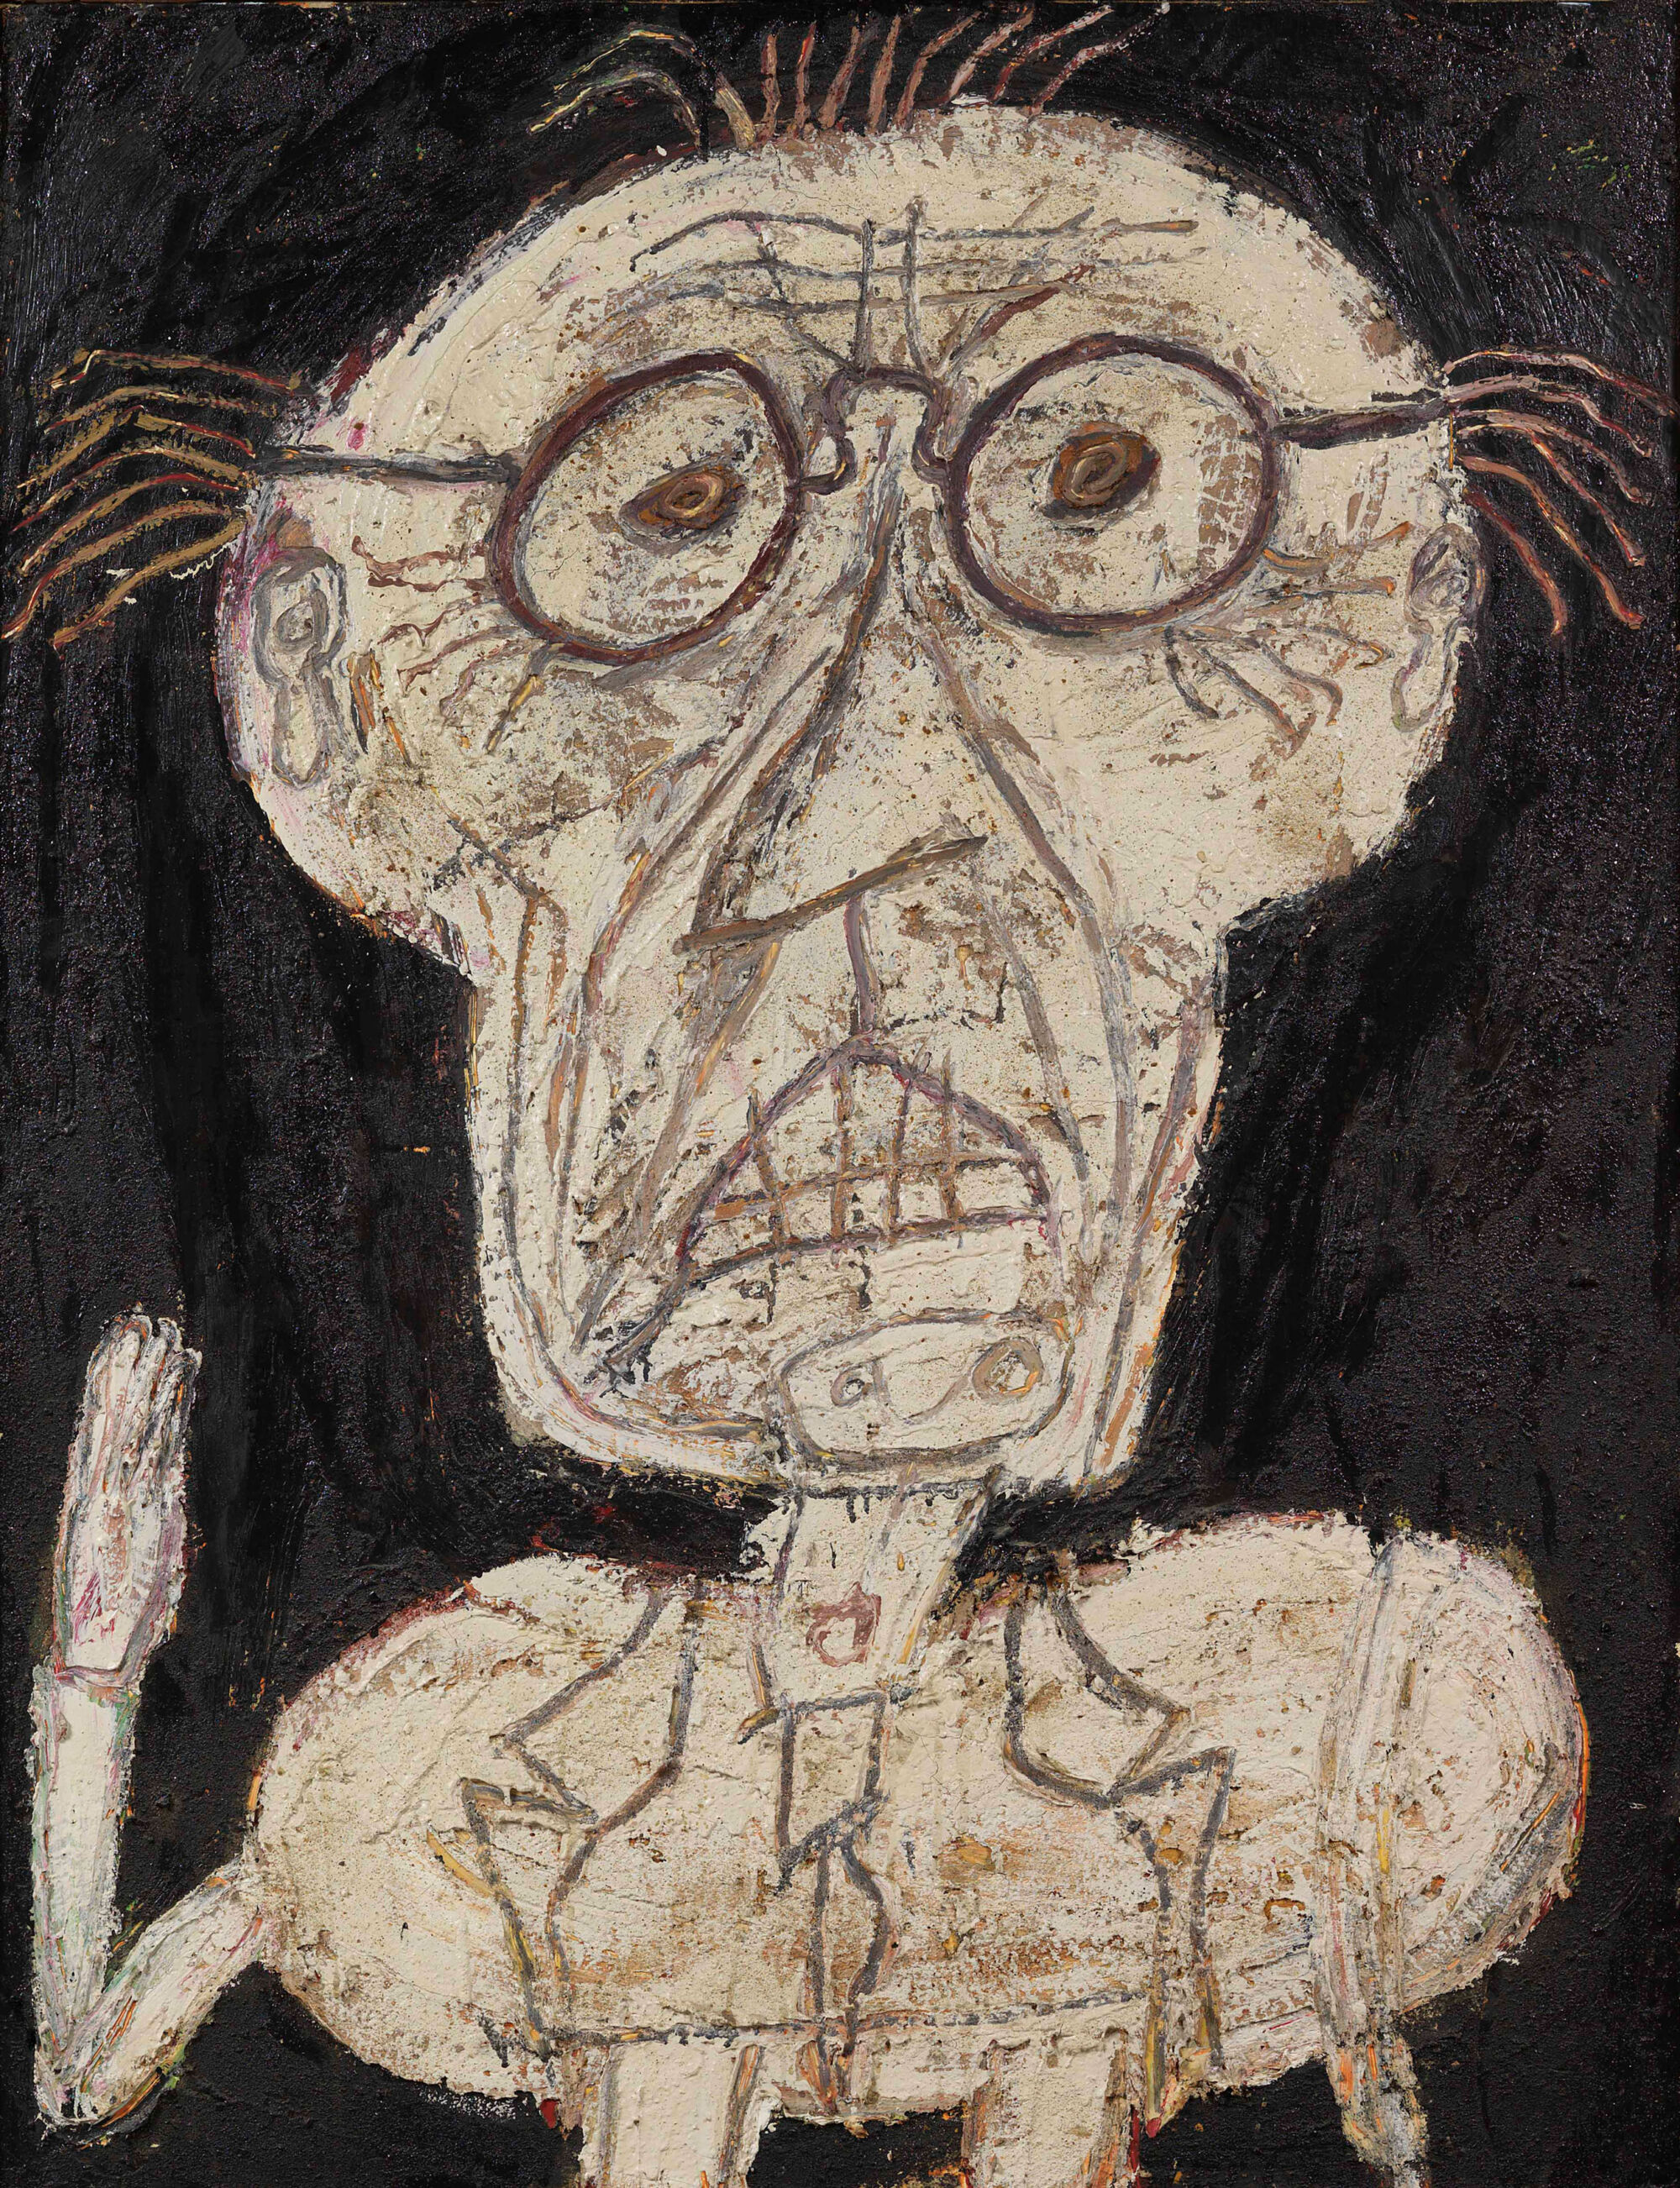 The Wick - Viewing Jean Dubuffet: Brutal Beauty